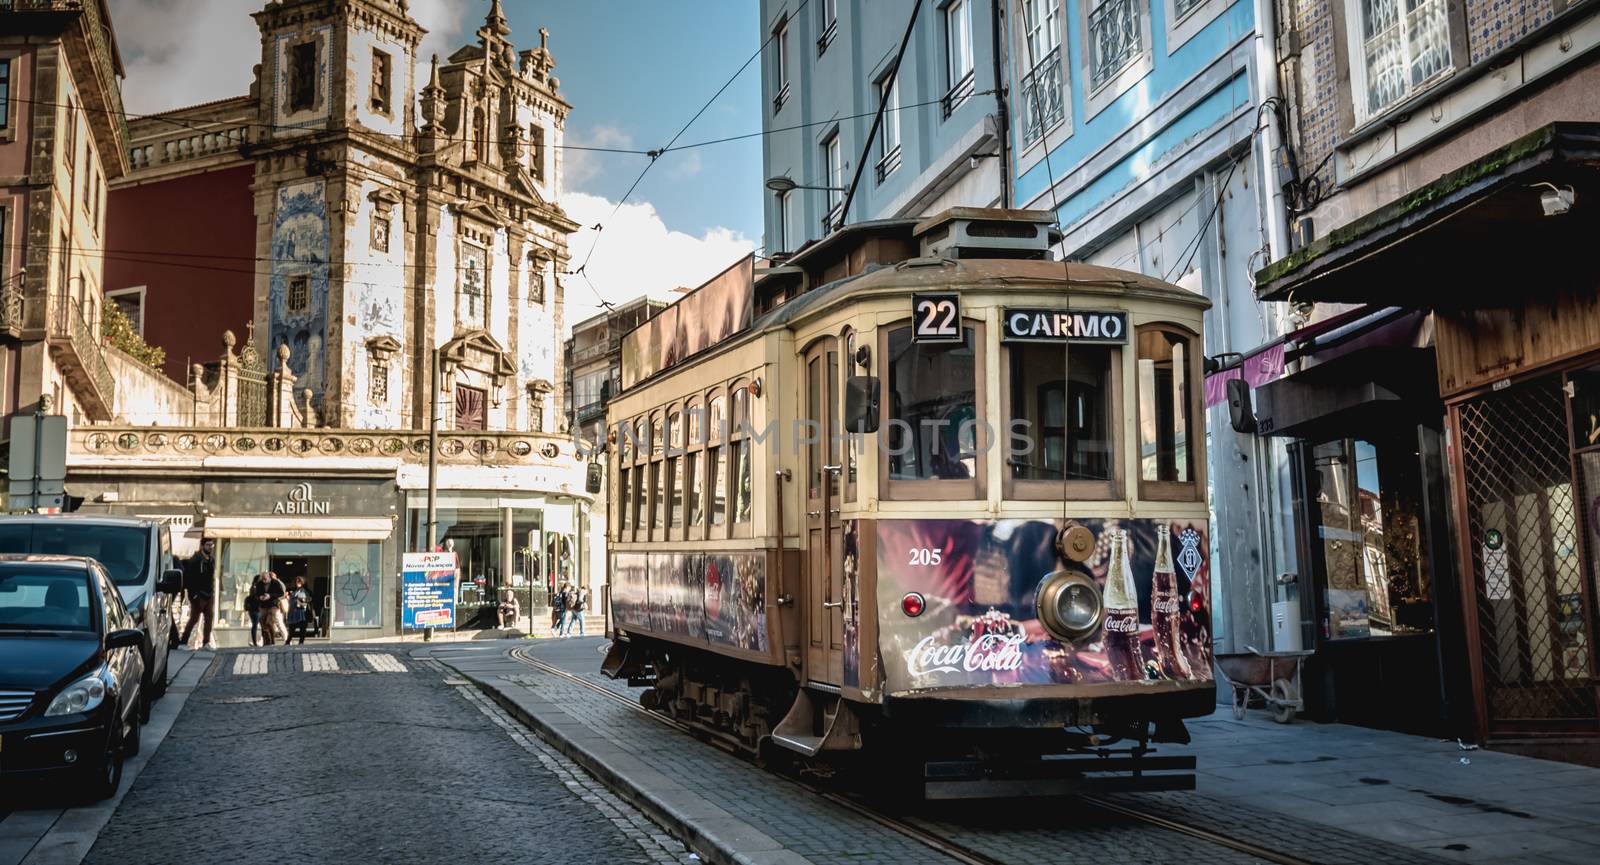 Traditional electric tram flowing through the streets of Porto,  by AtlanticEUROSTOXX